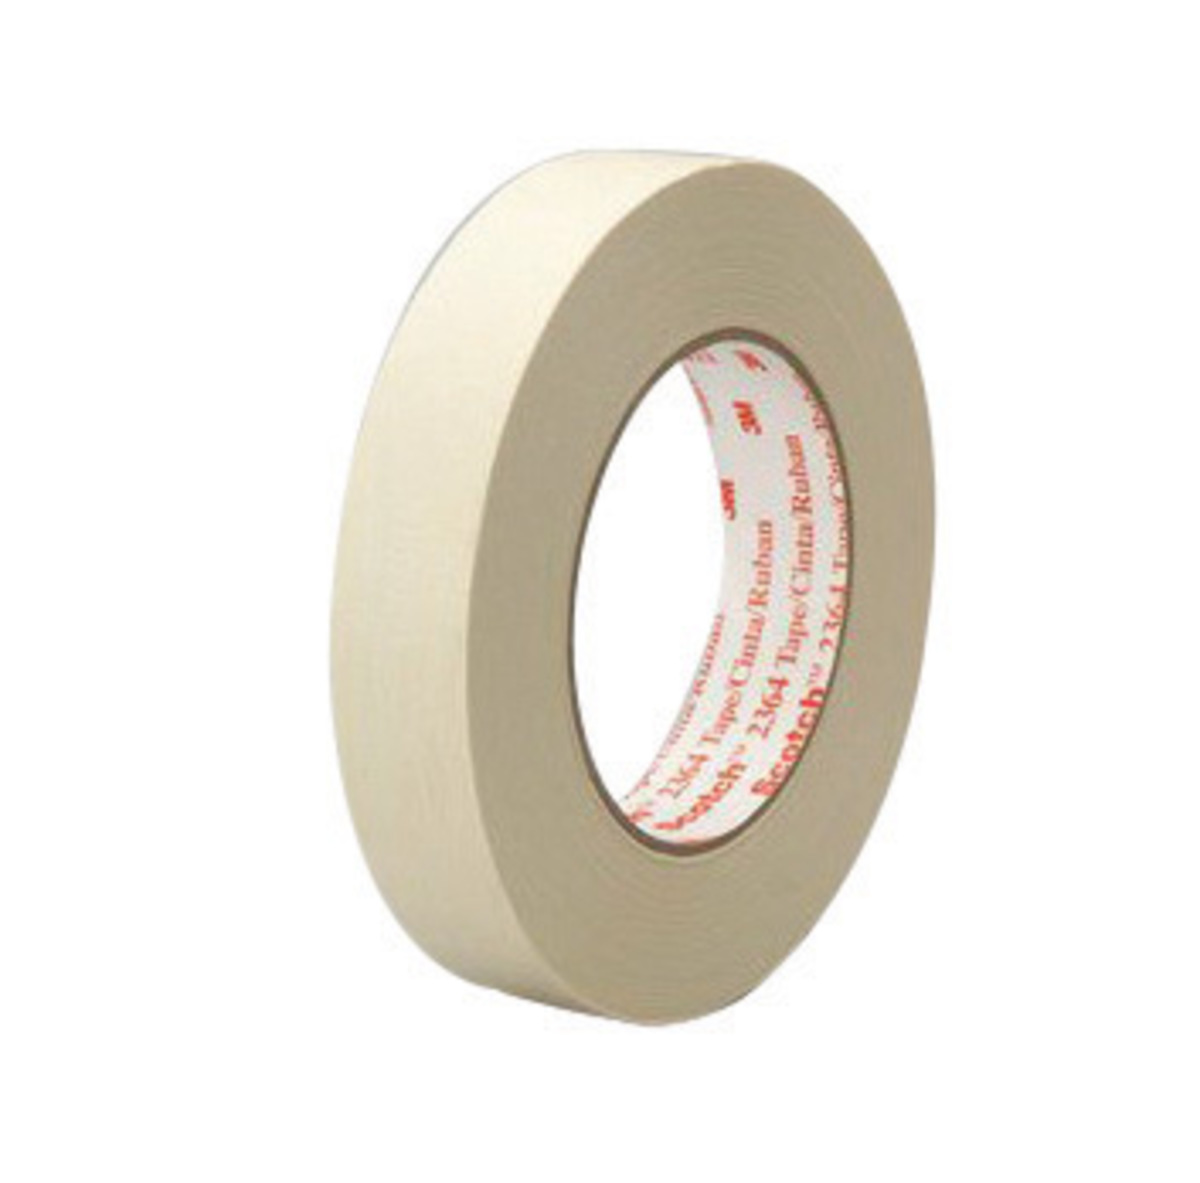 3M 401+ Scotch High Performance Green Masking Tape: 2 in. (48mm actual) x  60 yds. (Green)